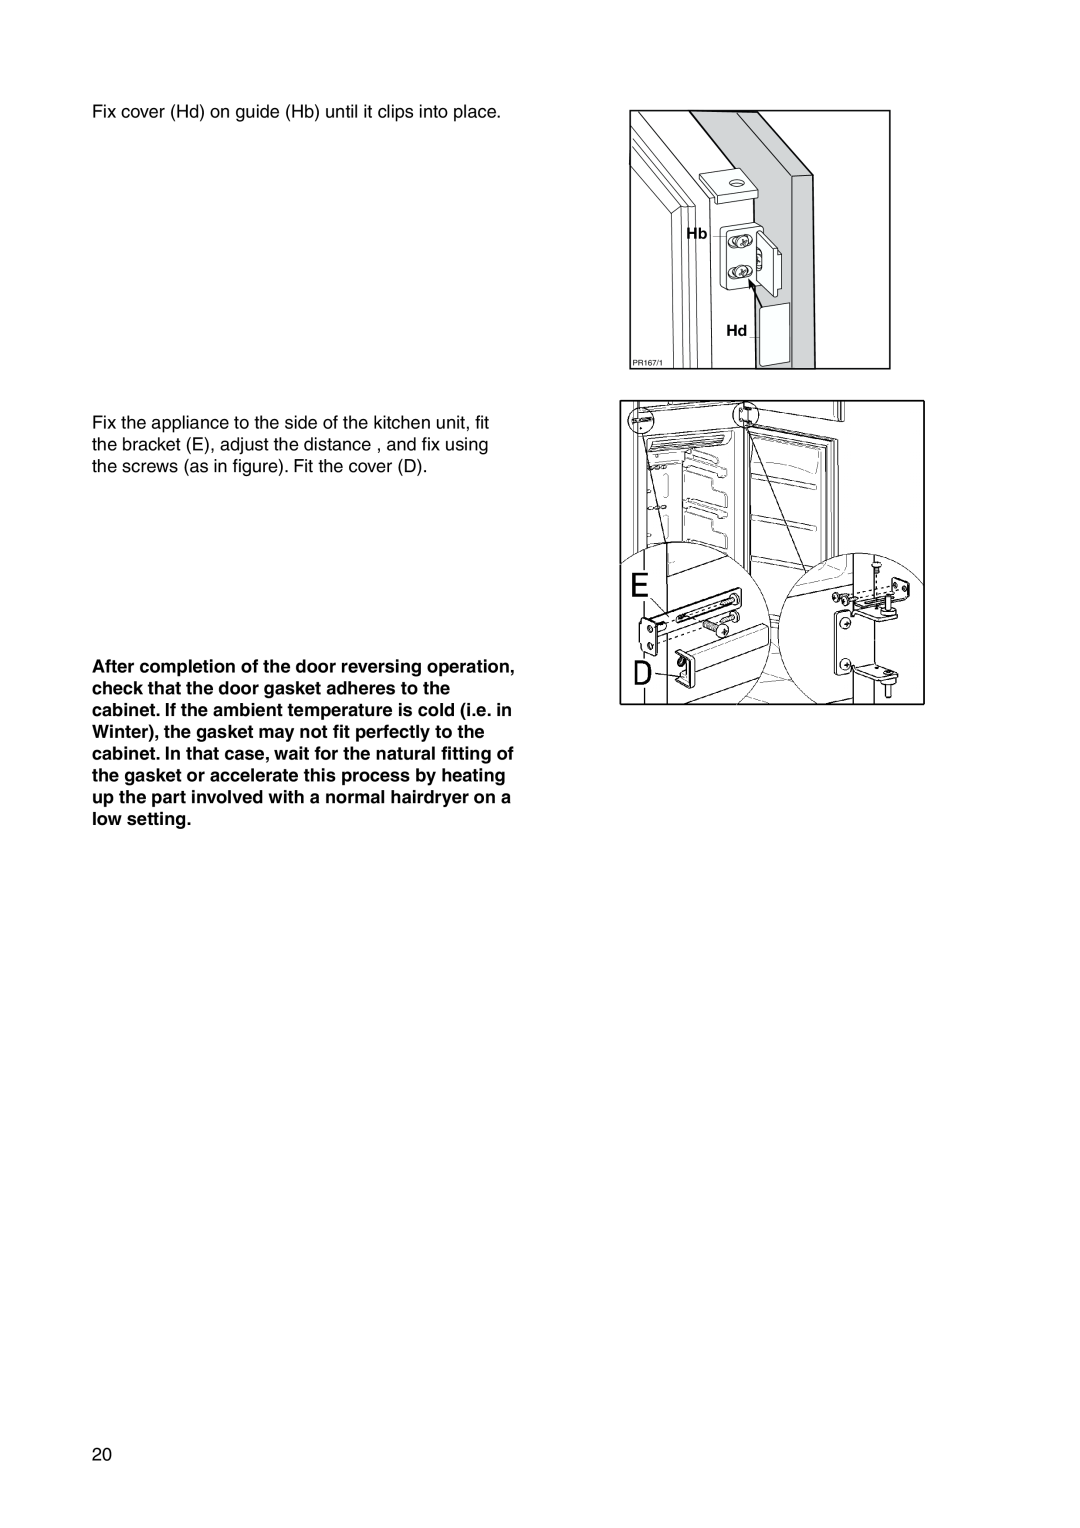 Electrolux ENN 26800 user manual Fix cover Hd on guide Hb until it clips into place, Hb Hd 